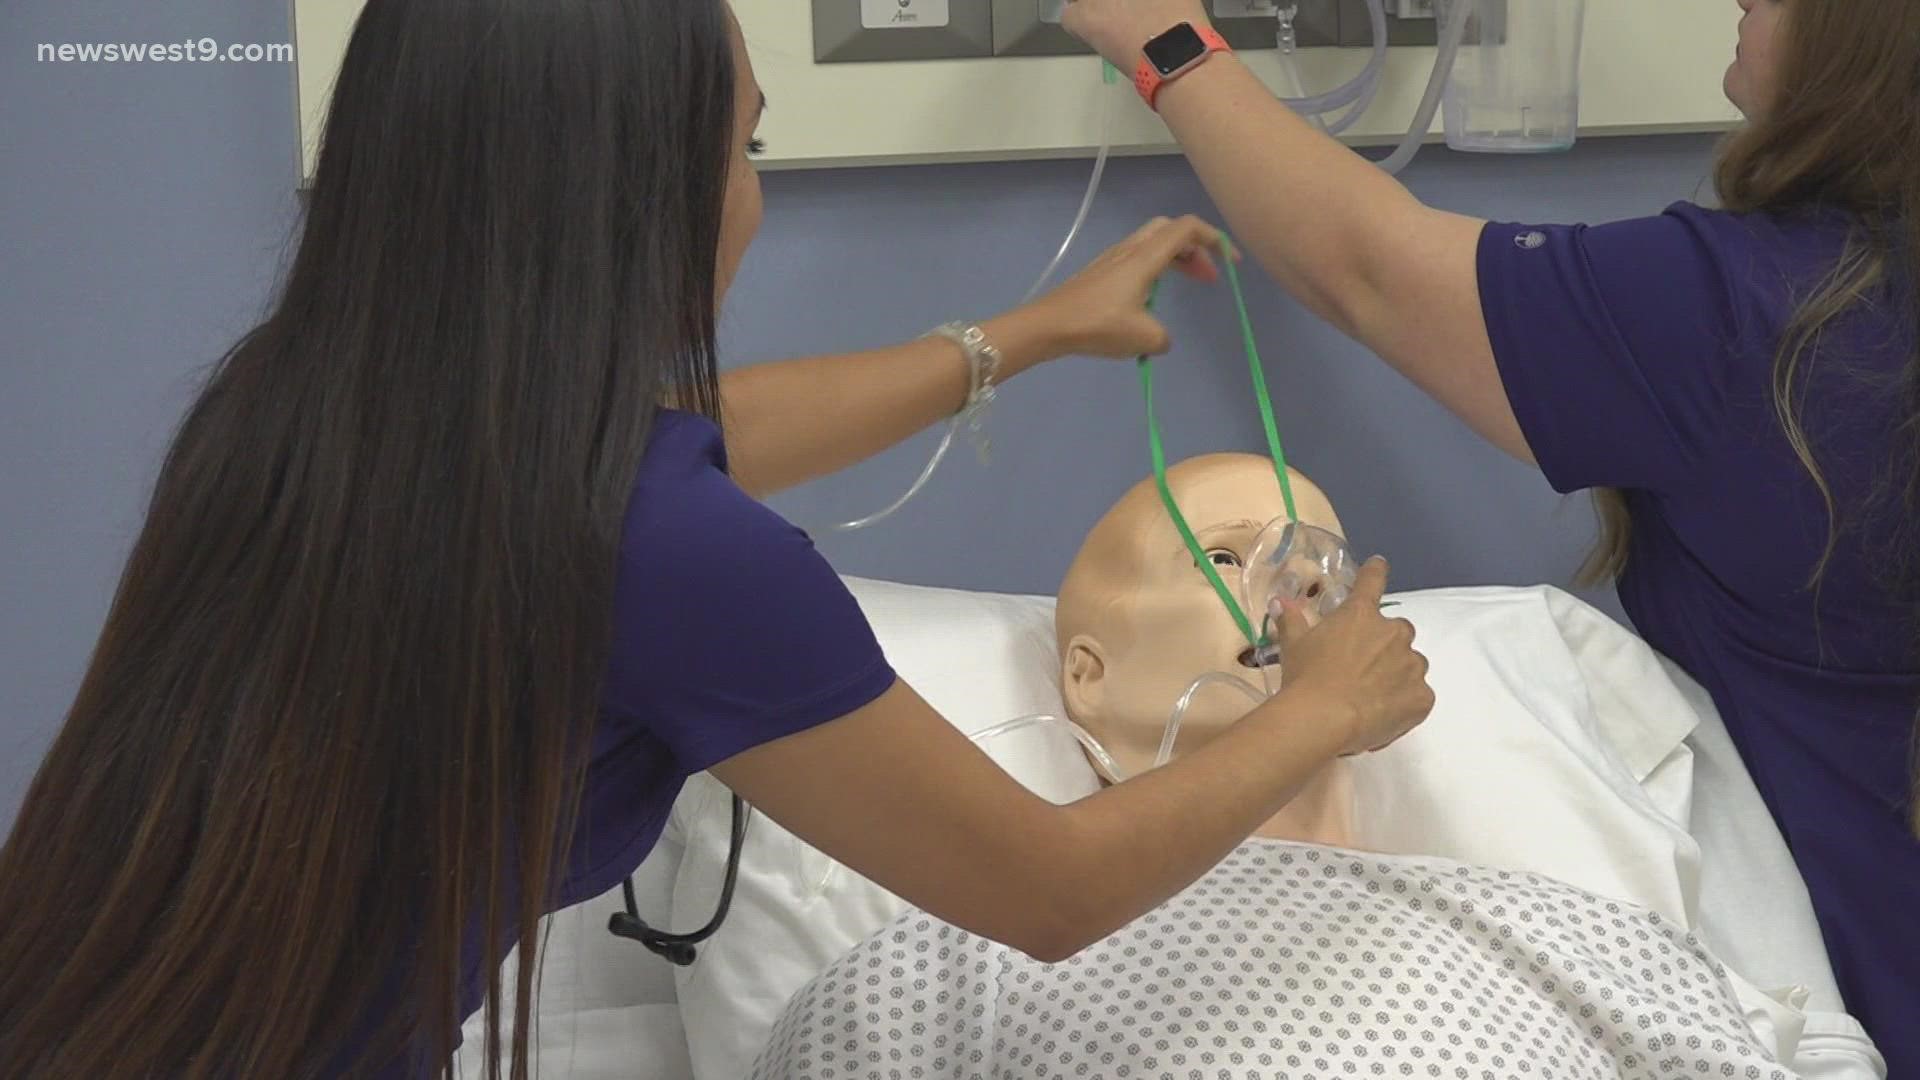 New nurses have been training at Midland College for years to take care of the sick, and now they are ready to help.